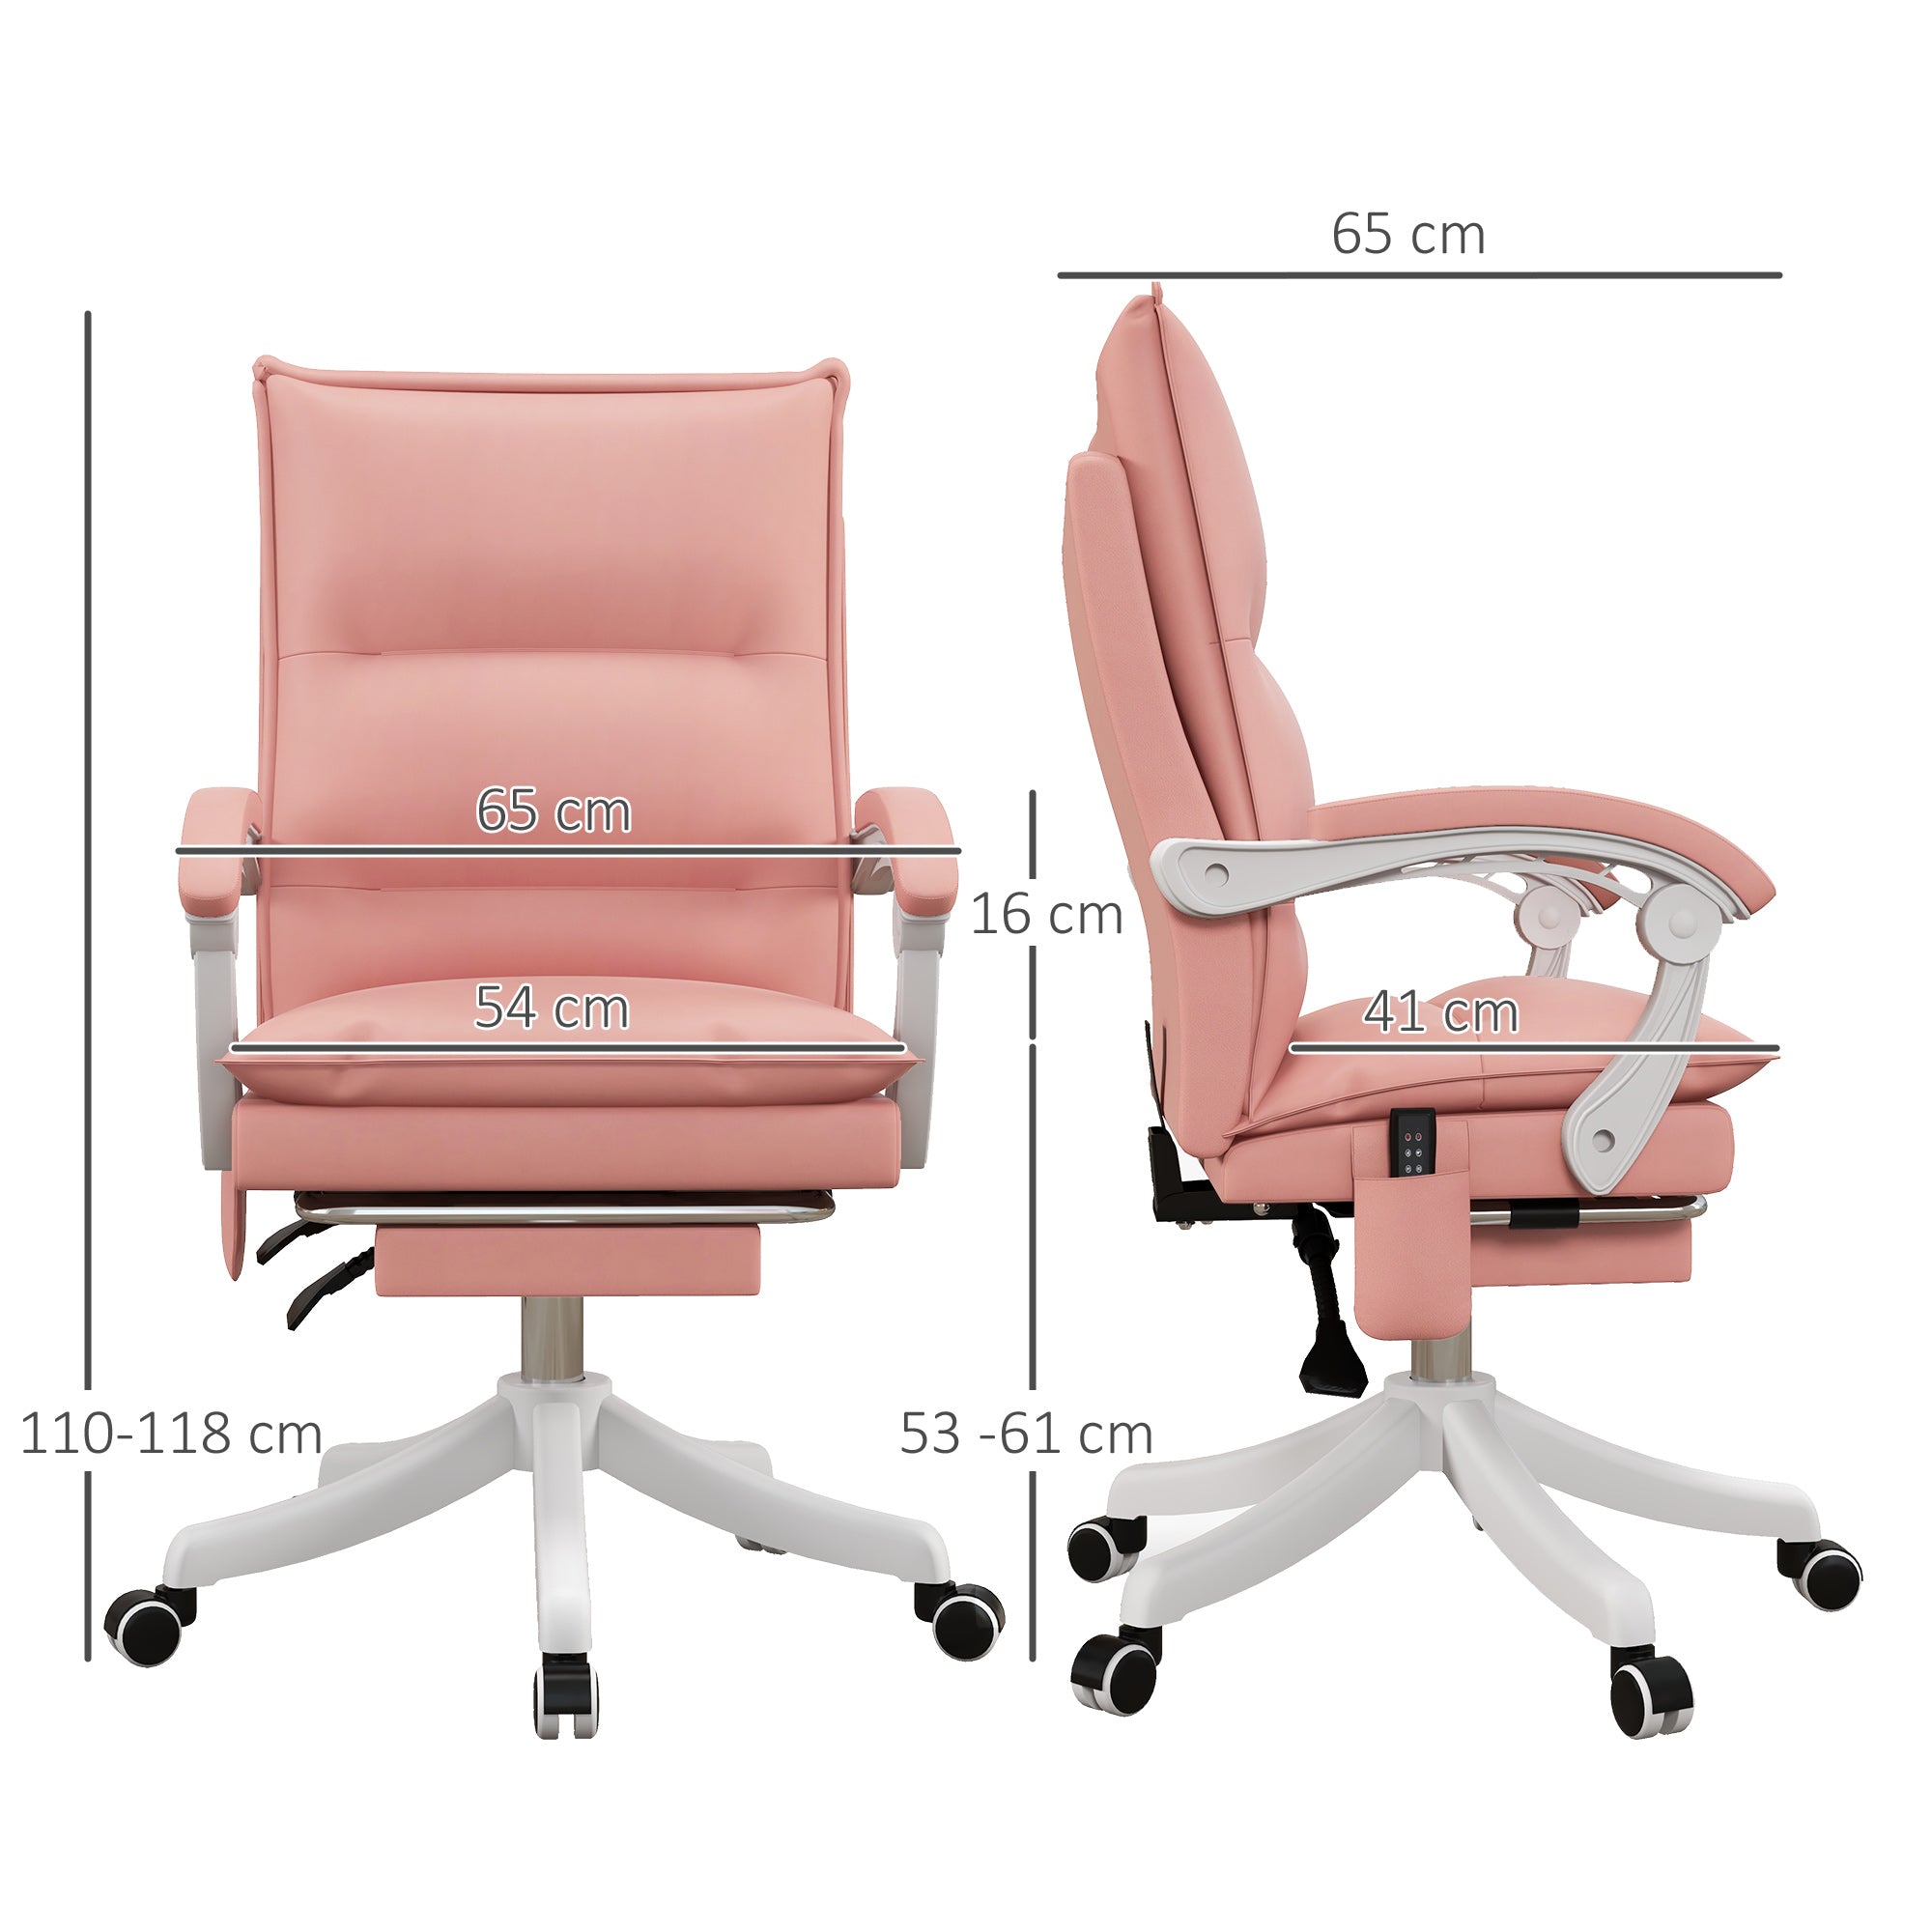 Vinsetto Vibration Massage Office Chair with Heat, Faux Leather Computer Chair with Footrest, Armrest, Reclining Back, Double-tier Padding, Pink - TovaHaus